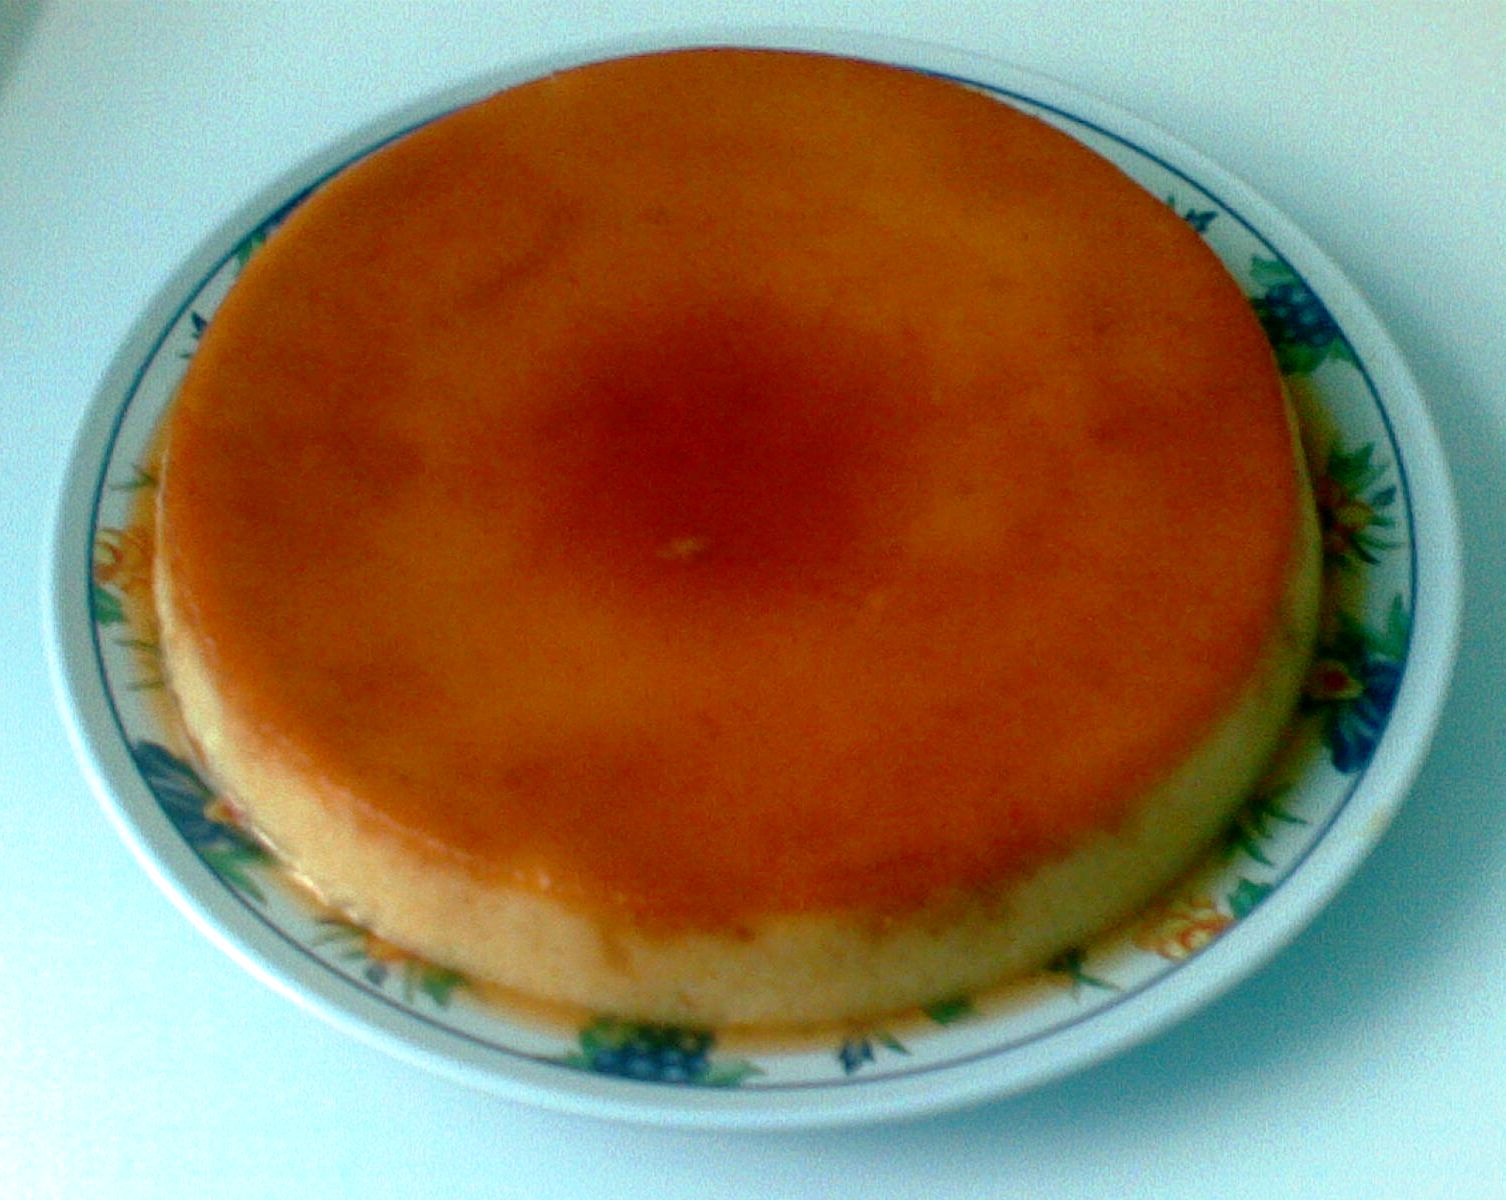 From Bakery 2 Embroidery: Puding Karamel Pisang